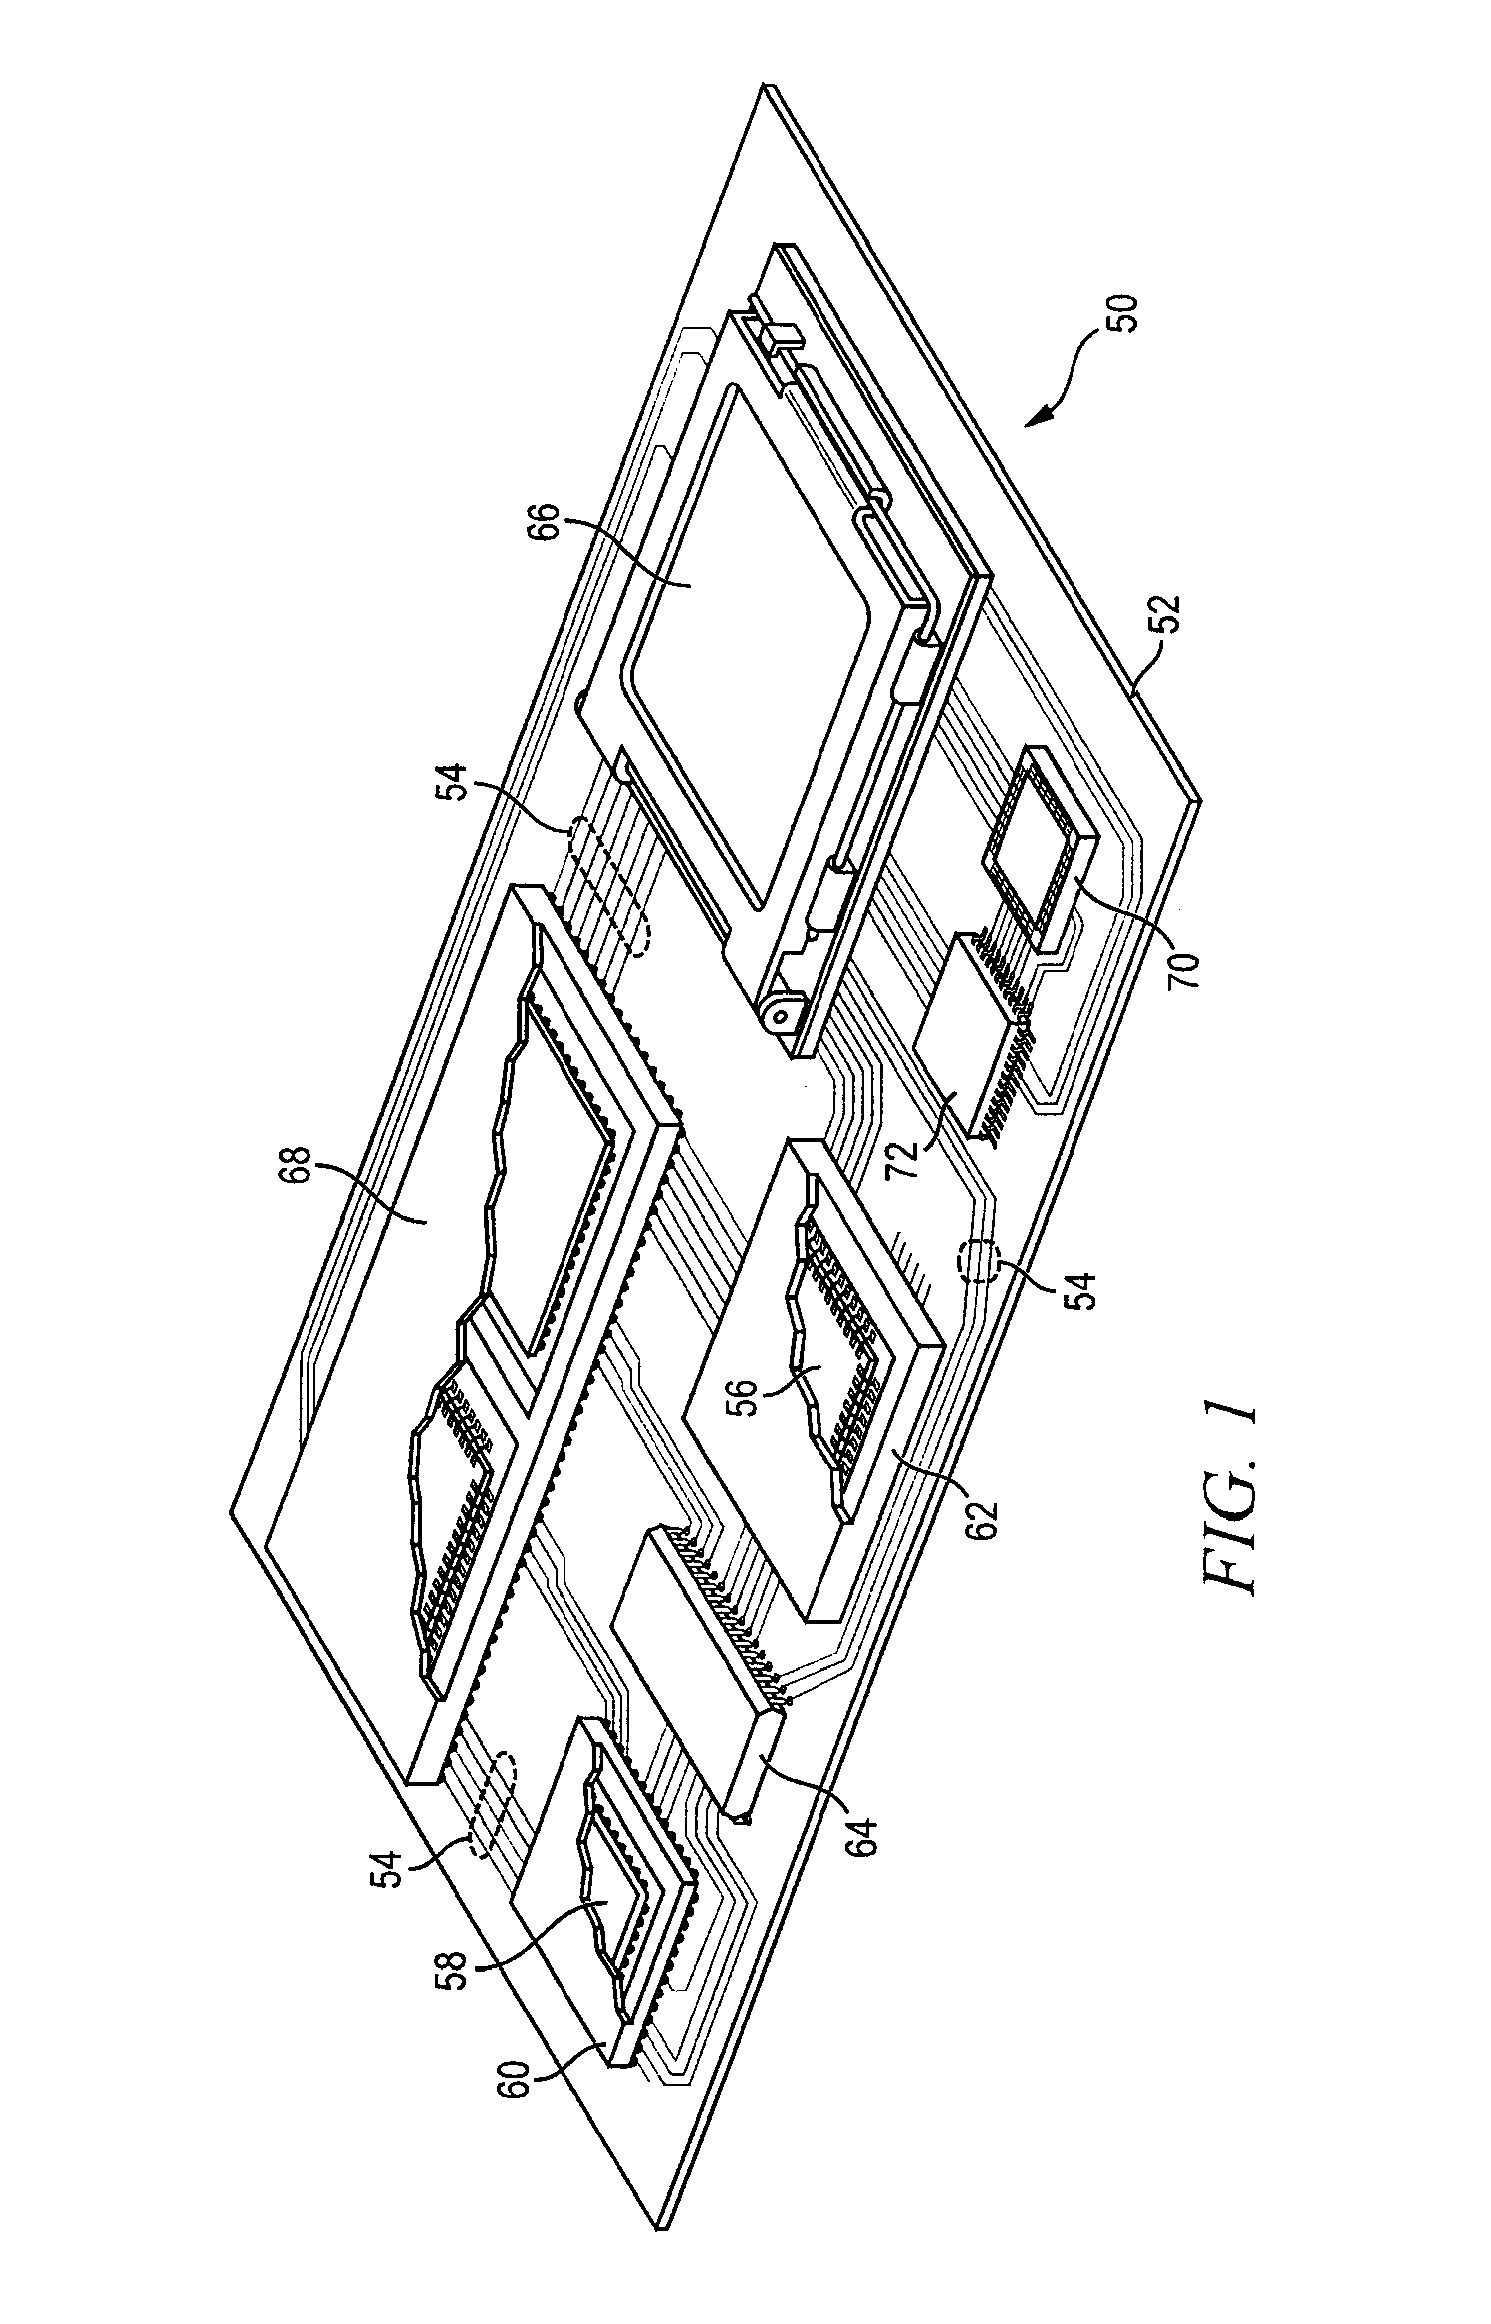 Semiconductor Device and Method of Forming Conductive Vias Through Interconnect Structures and Encapsulant of WLCSP